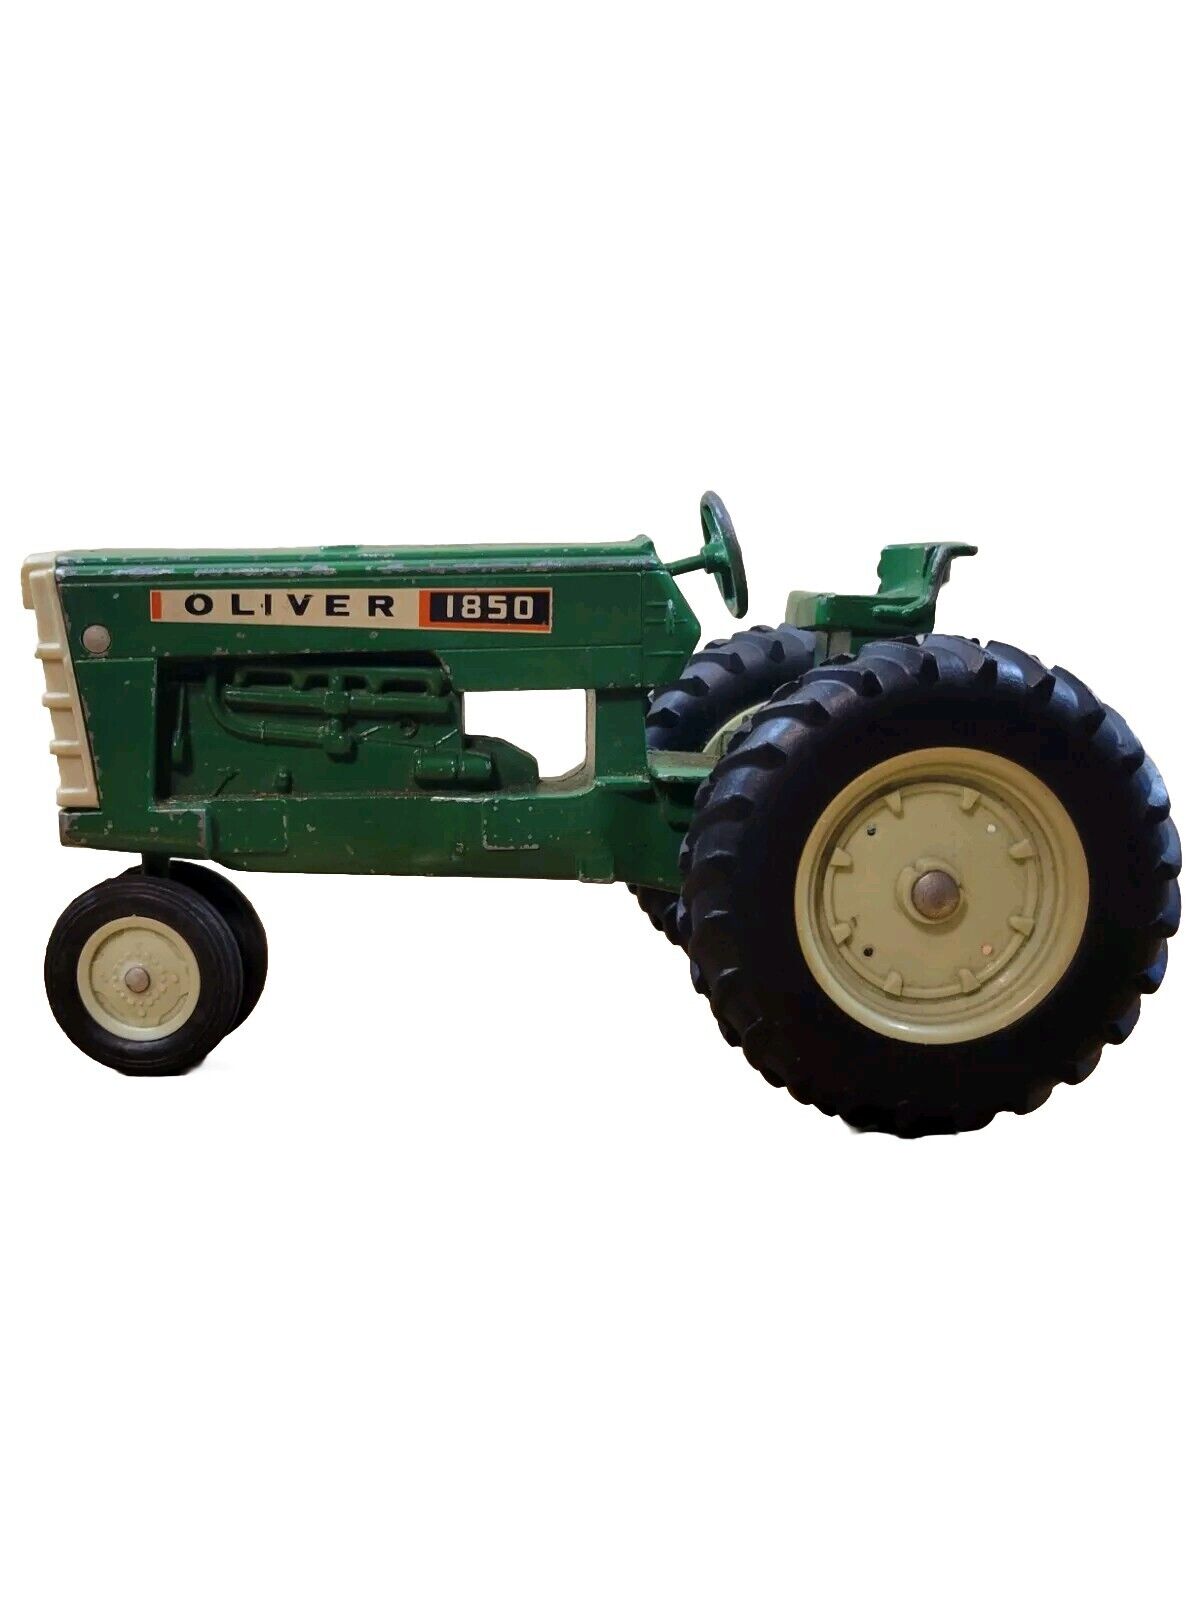 Vintage 1960\'s ERTL Diecast 1850 Oliver Tractor Narrow Front 1:16 Scale, Preown